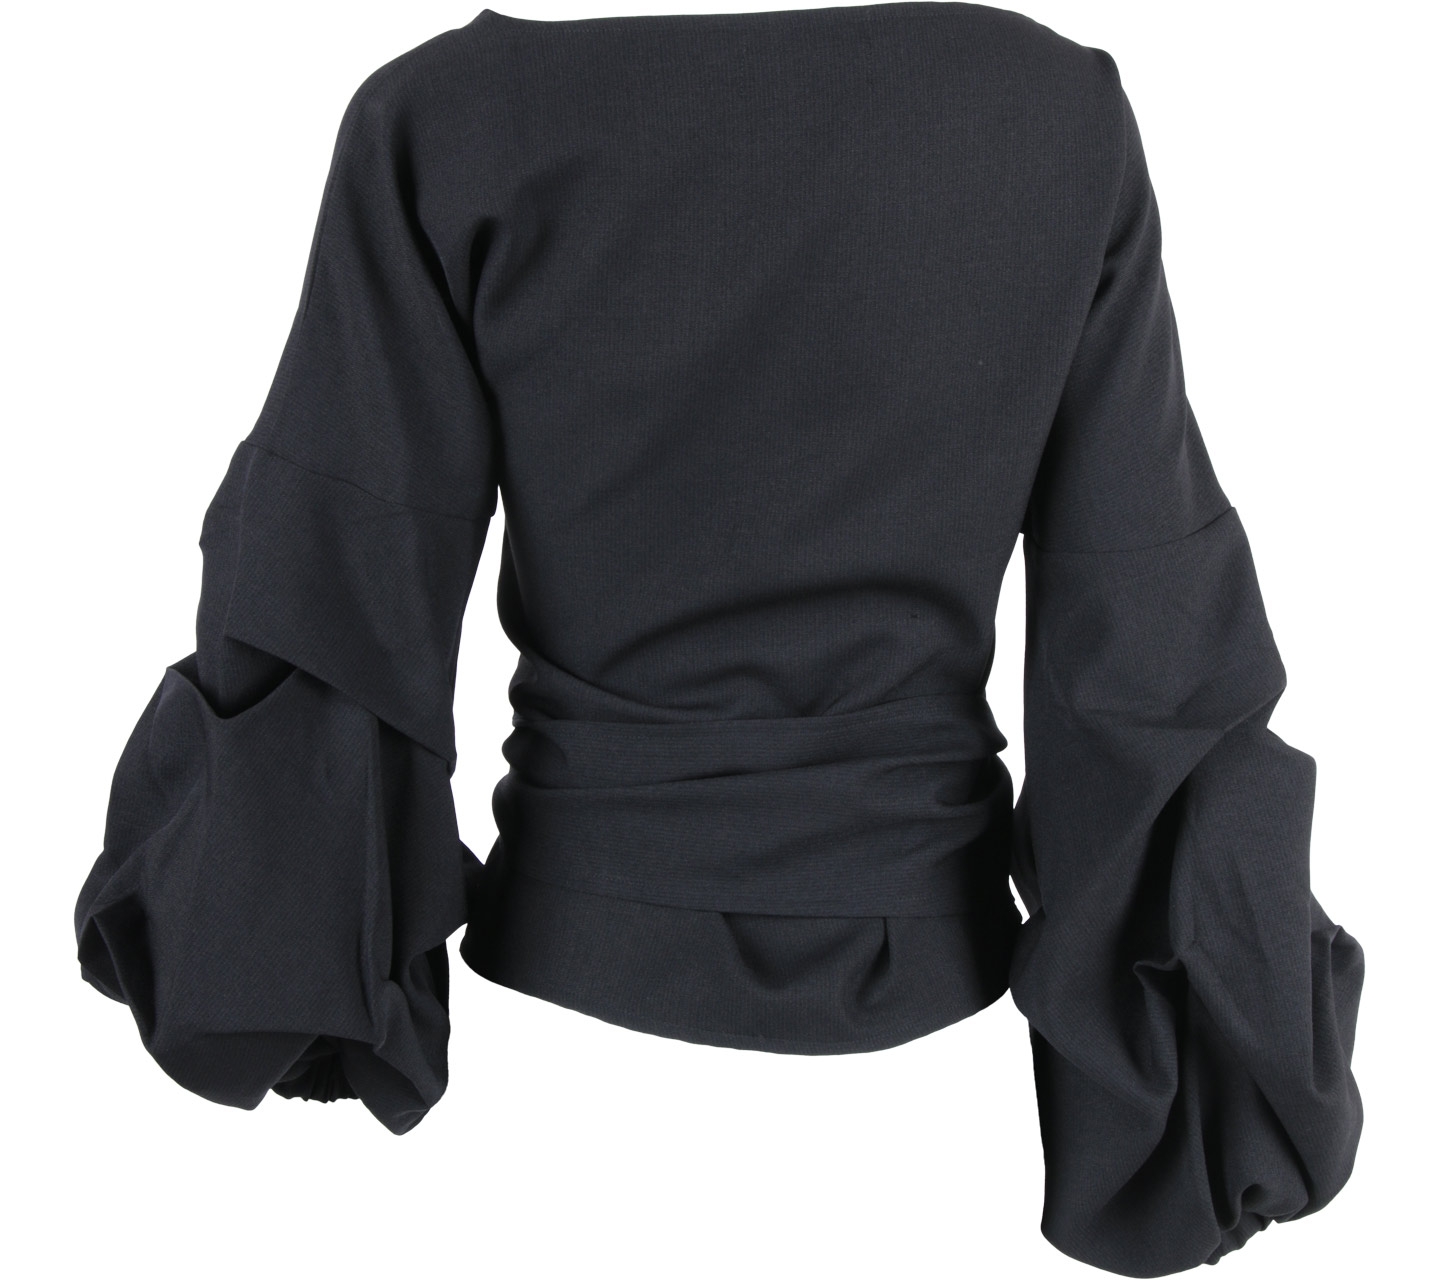 ATS The Label Black Tied Blouse